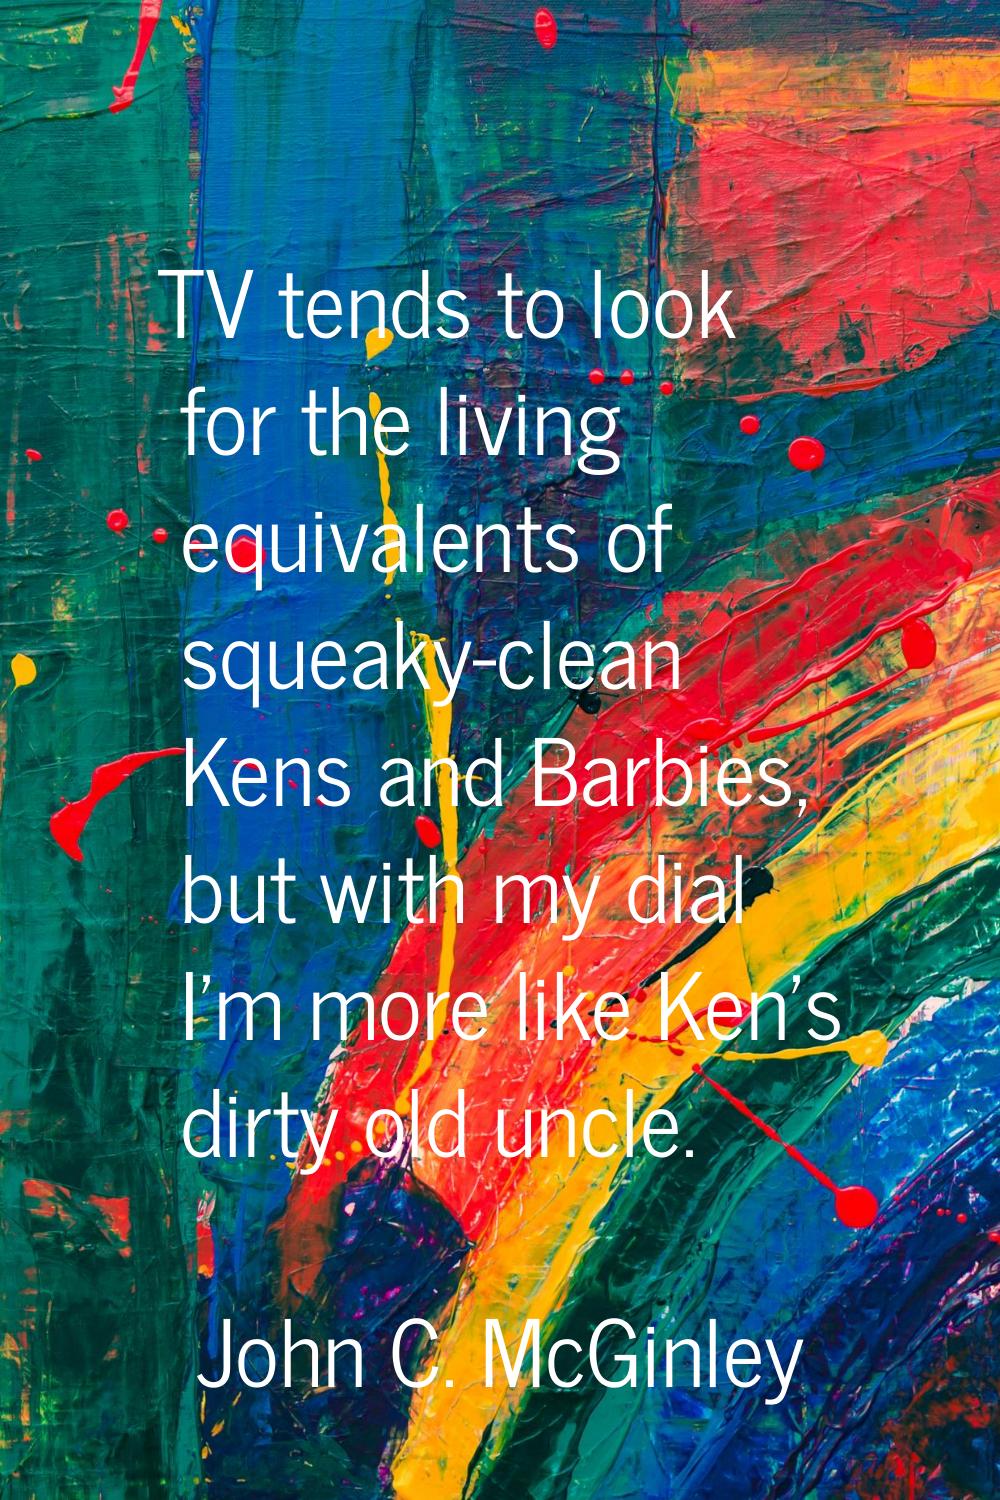 TV tends to look for the living equivalents of squeaky-clean Kens and Barbies, but with my dial I'm